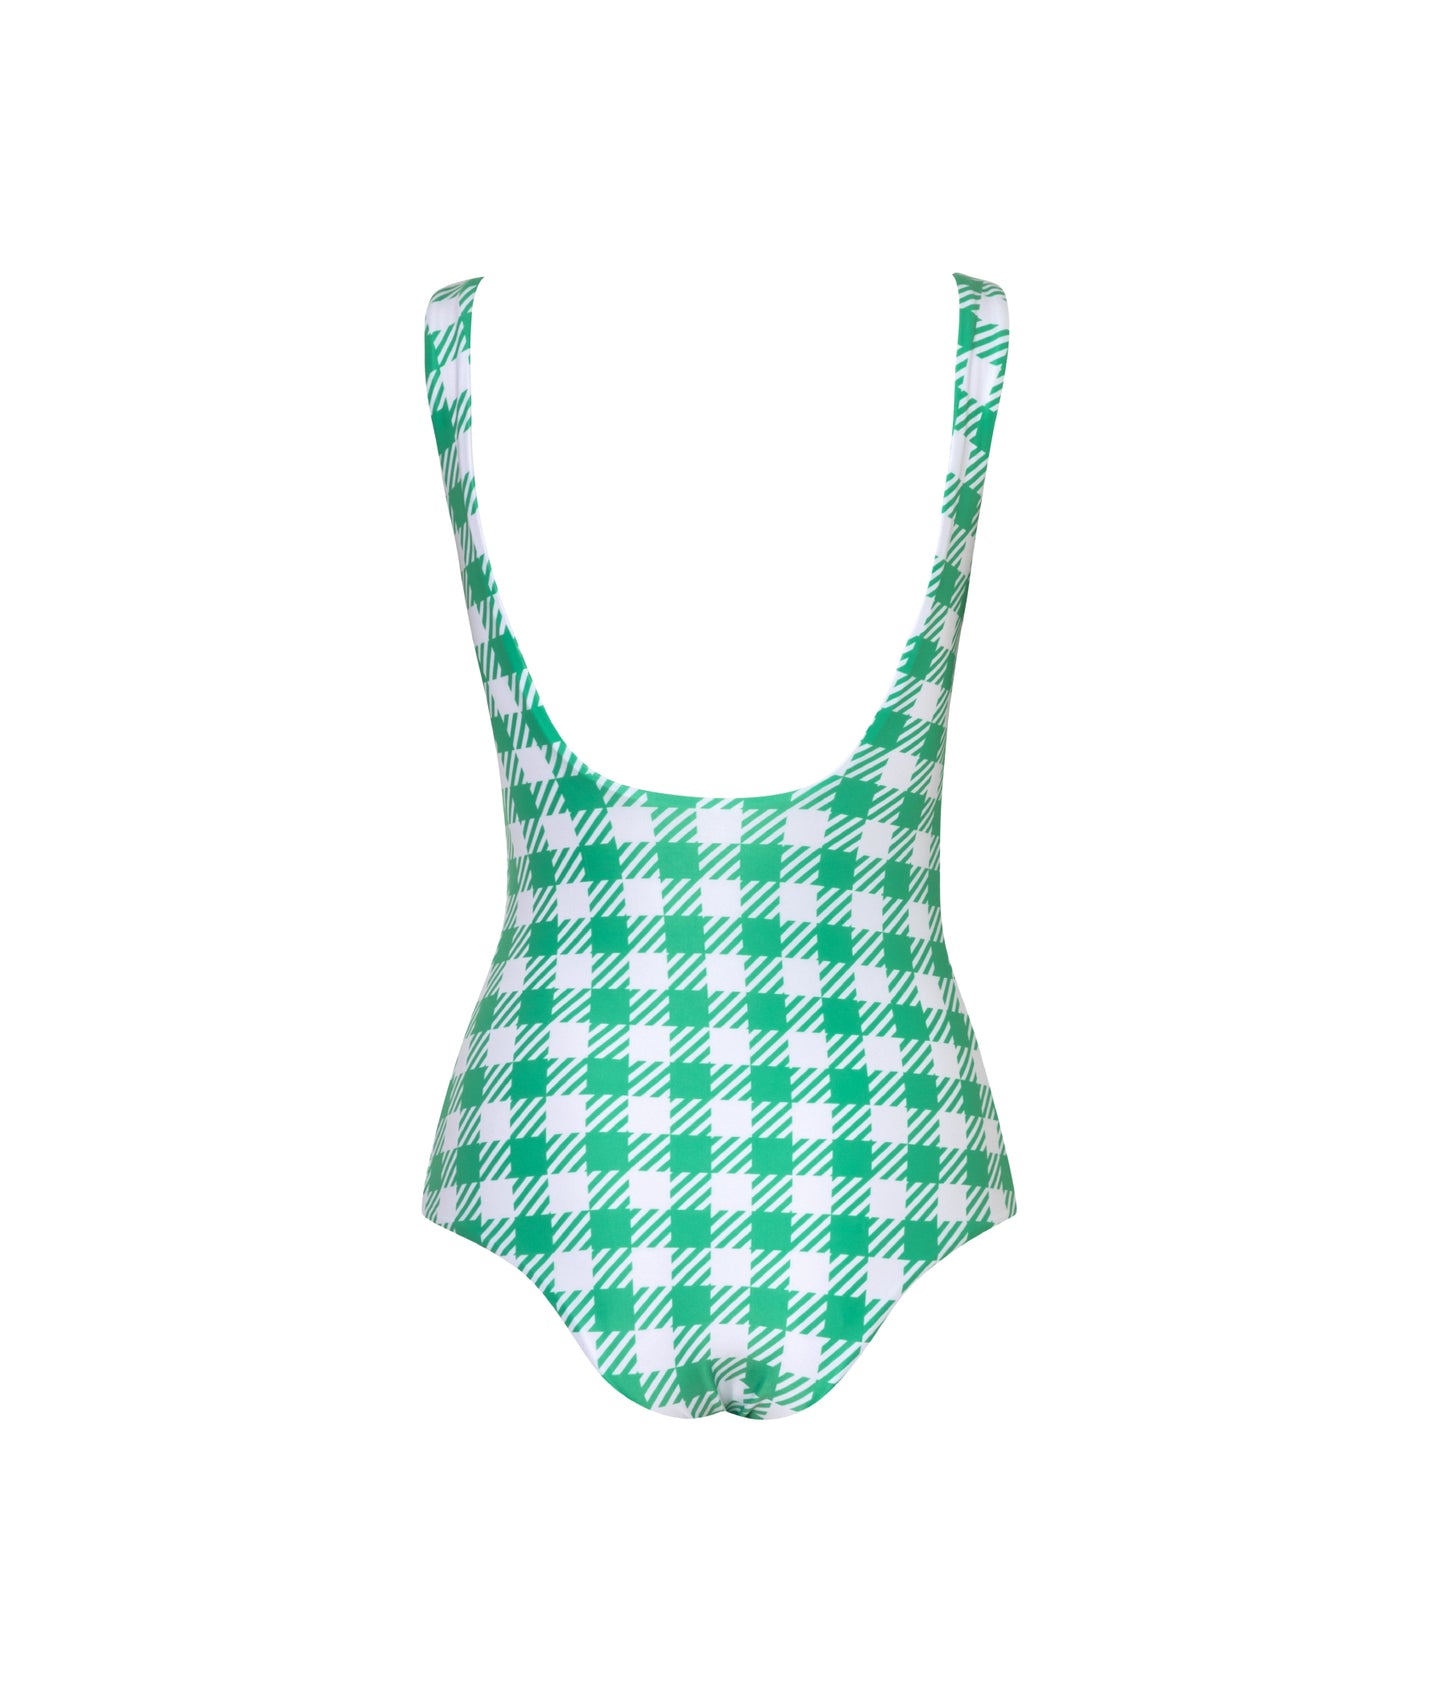 Verdelimon - One Piece - Egeo - Printed - Green Squares - Back